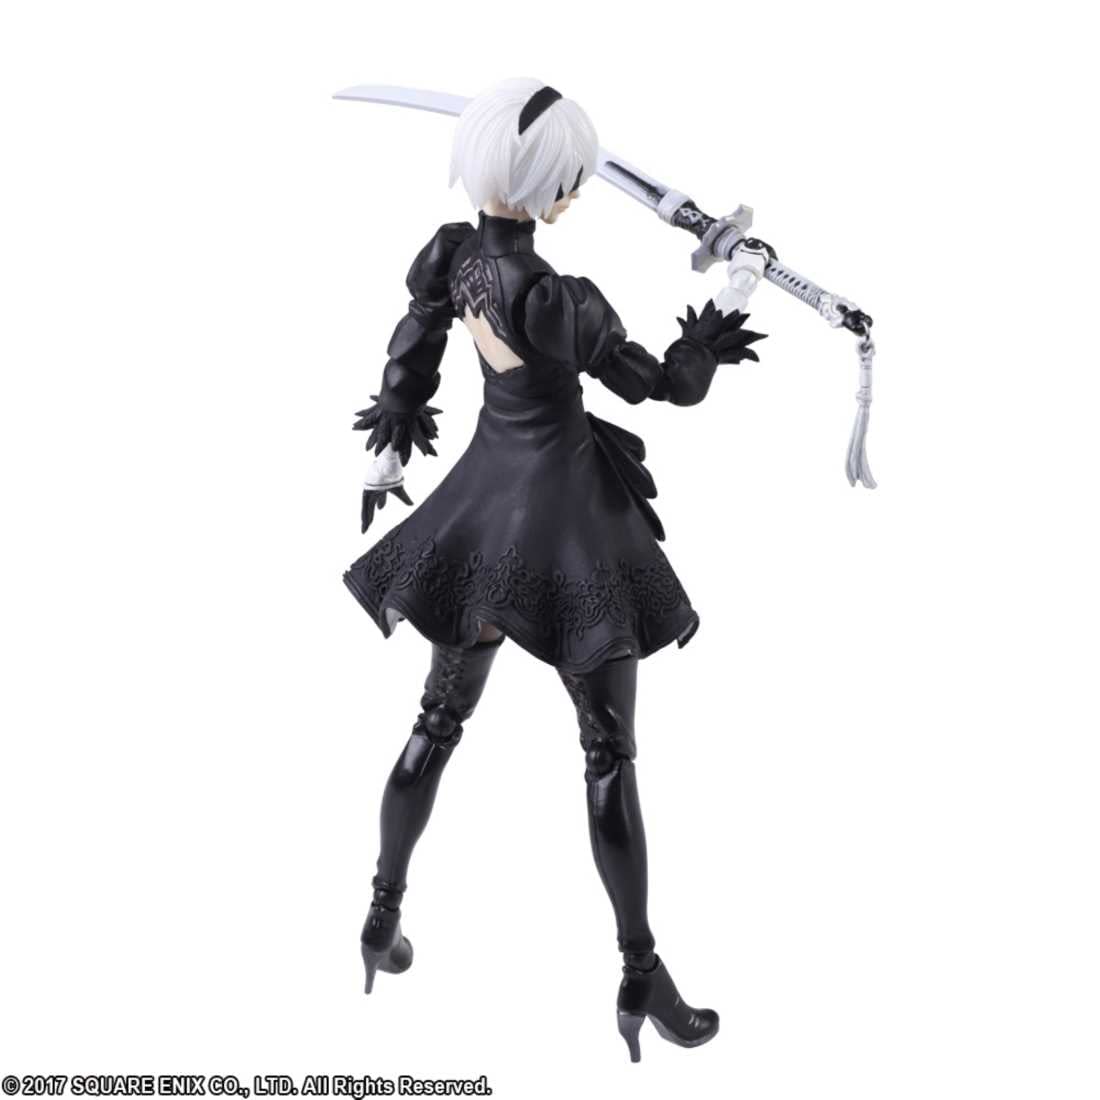 Nier Automata YoRHa 2B Gets Her Own Figure from Bring Arts